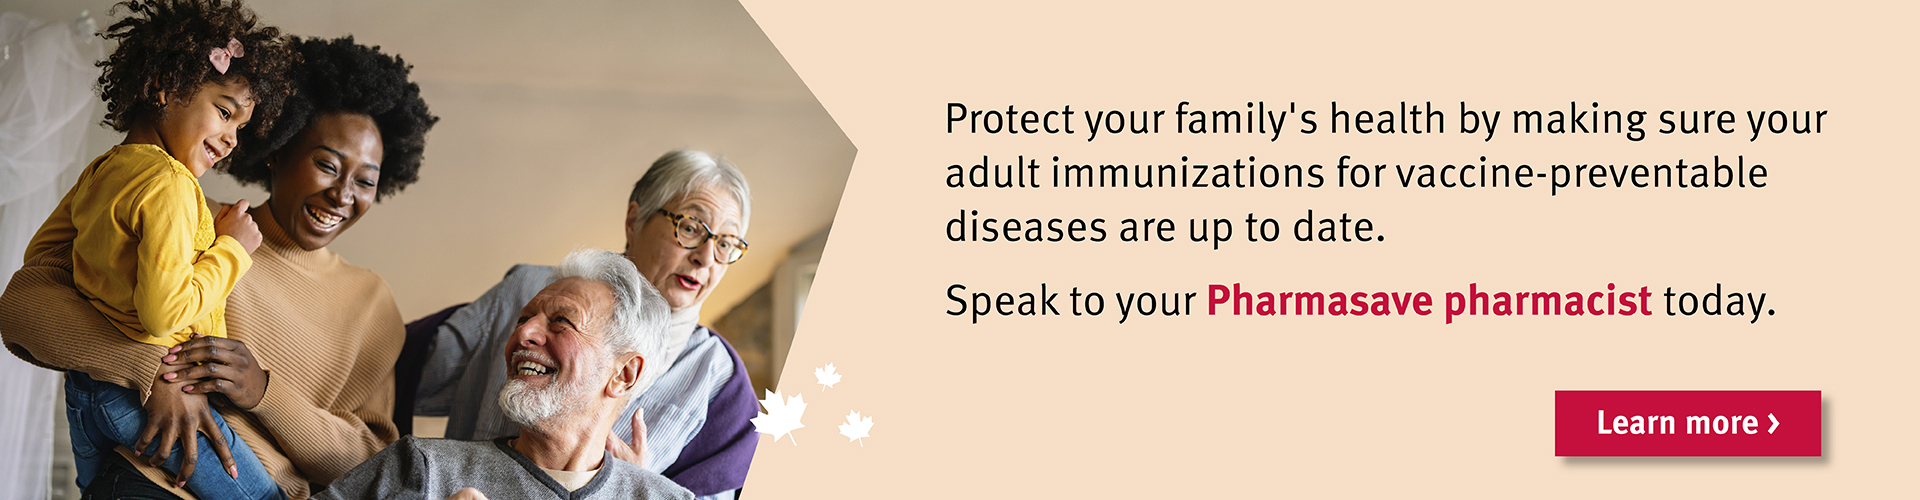 Protect your family's health by ensuring your adult vaccinations are up to date.